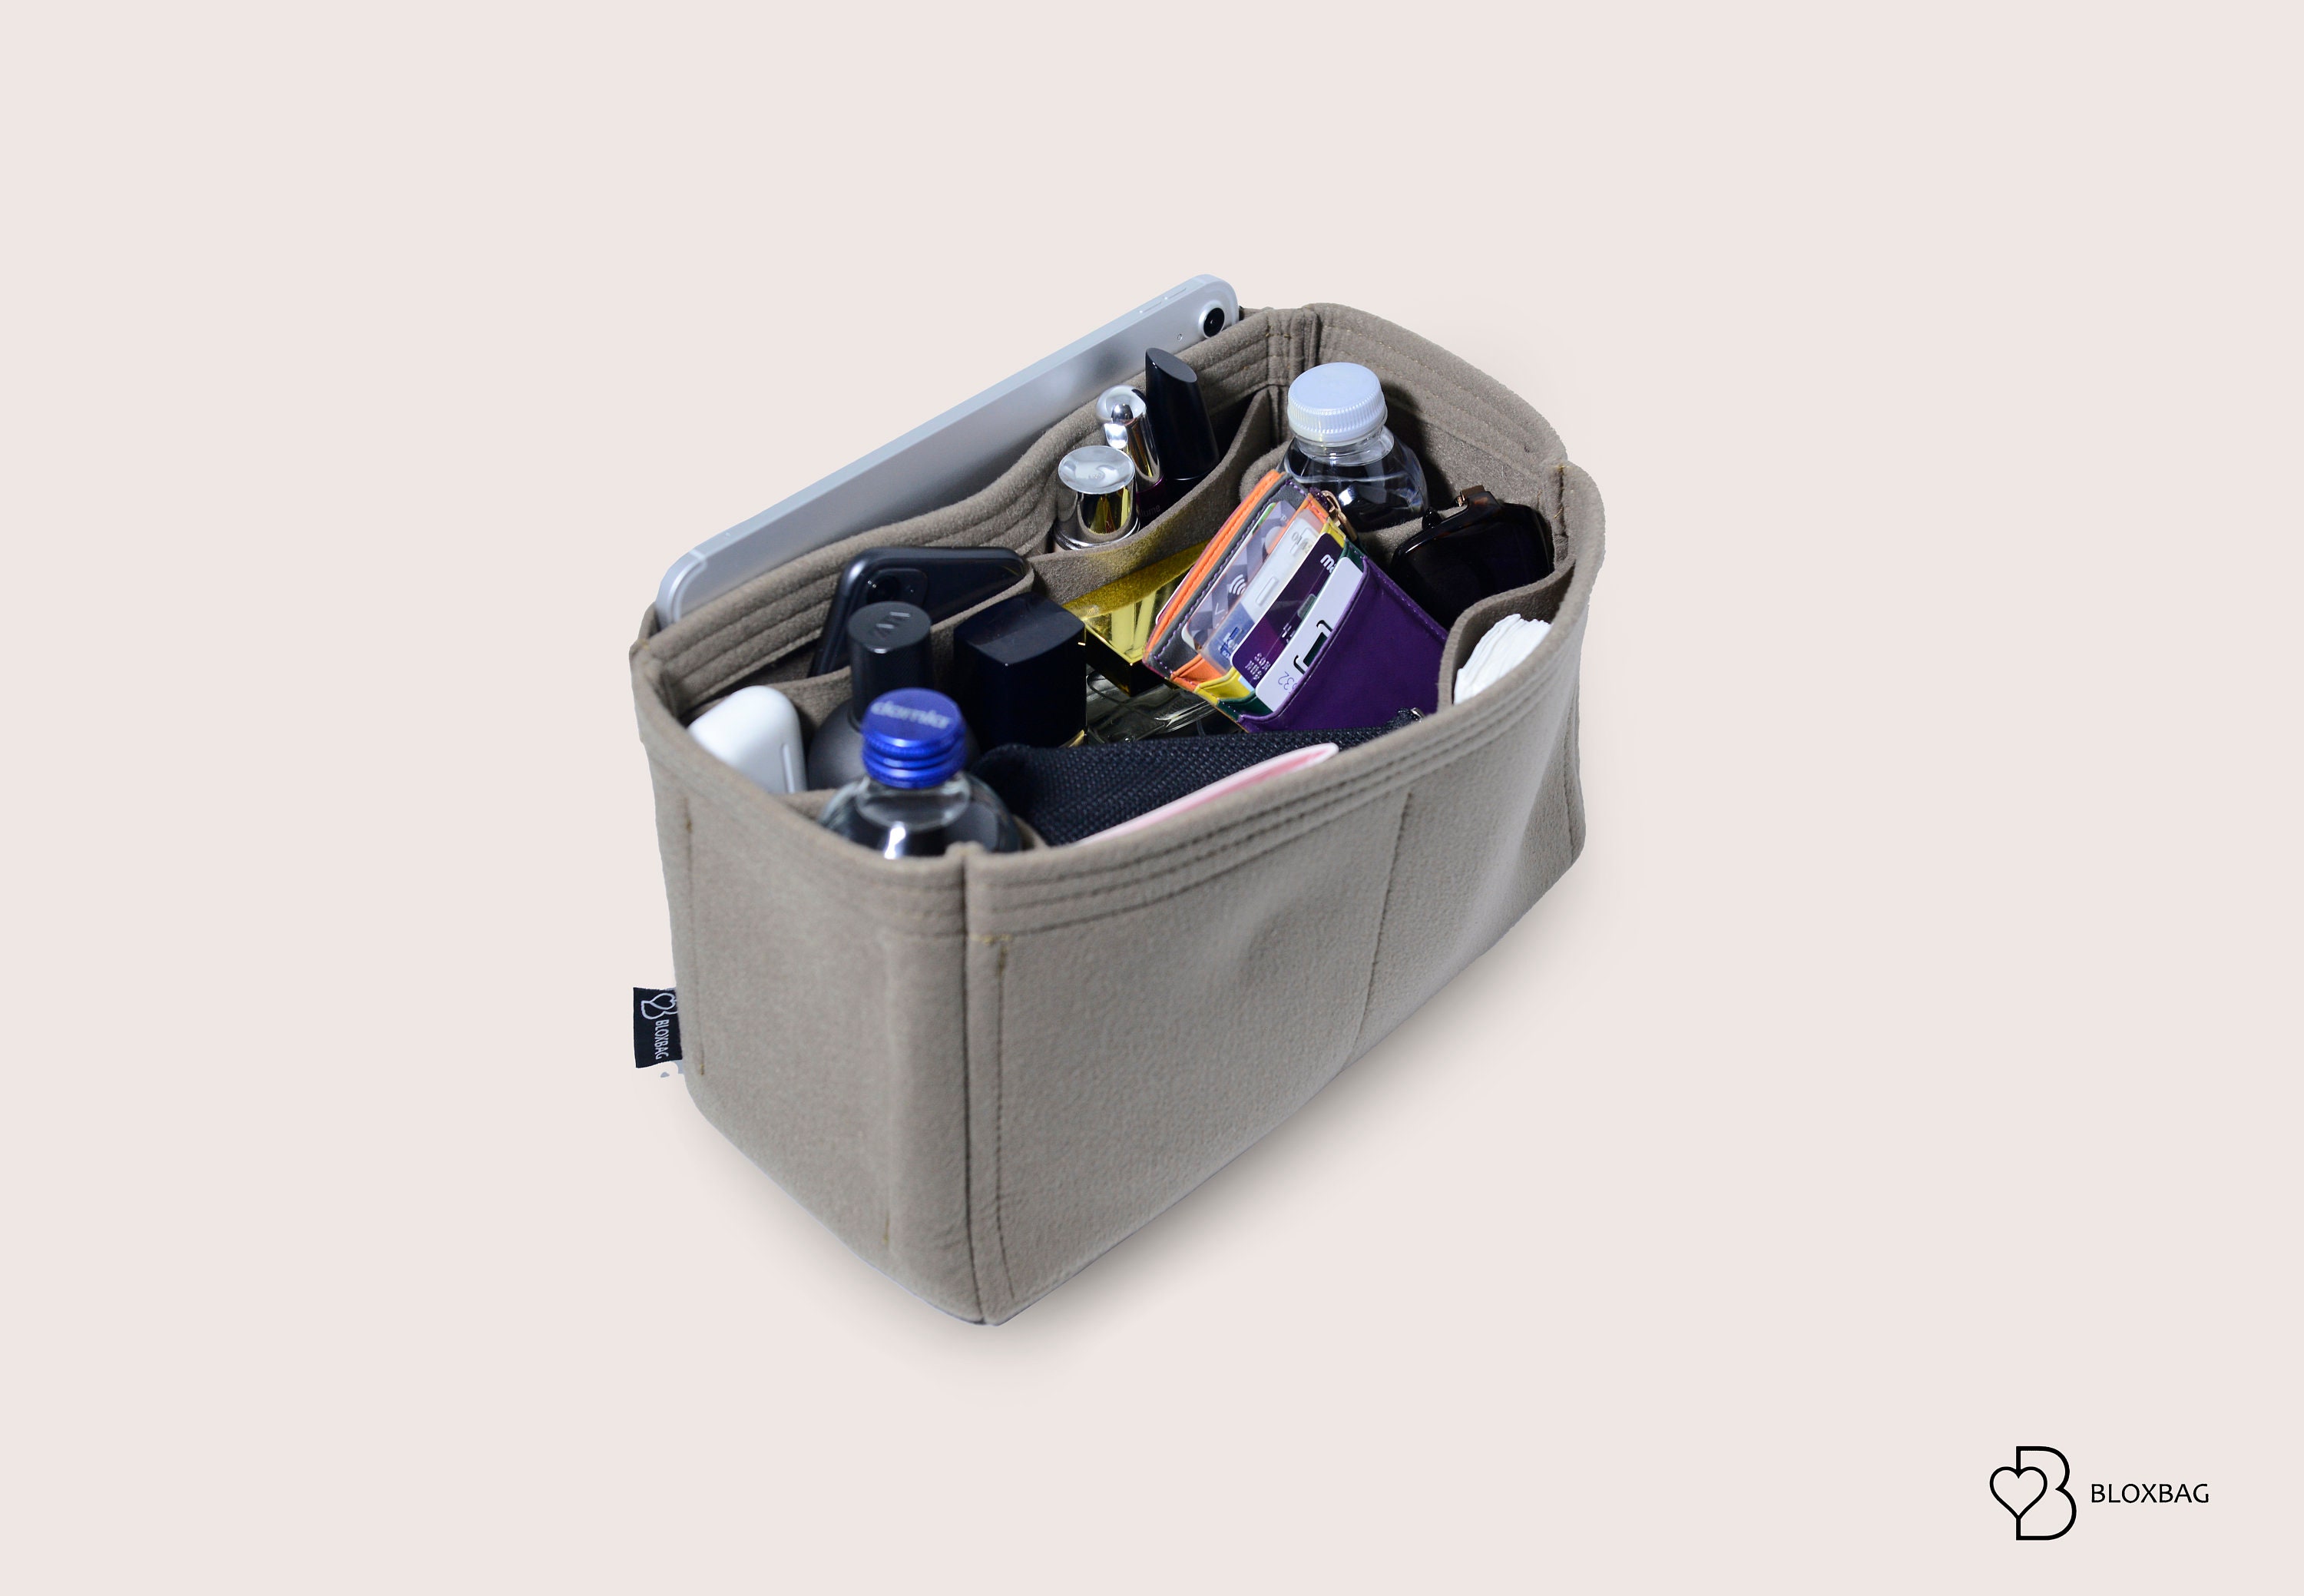 Tote Bag Organizer For Louis Vuitton Melie with Single Bottle Holder